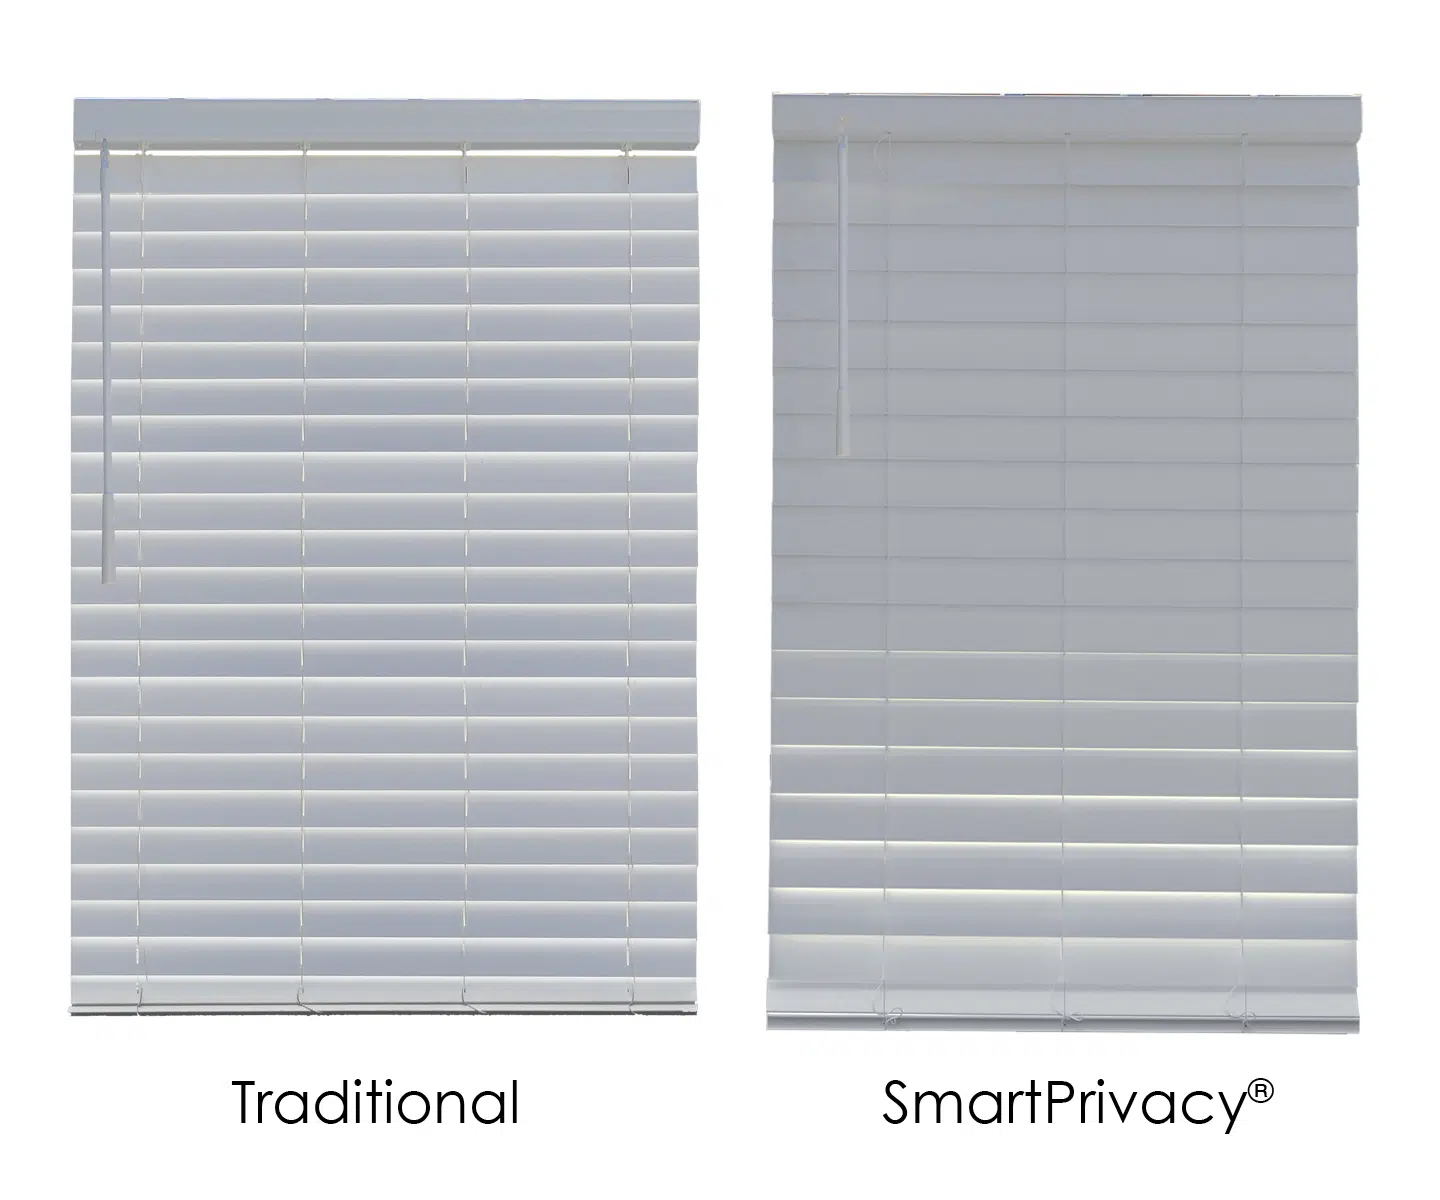 Comparison of traditional and SmartPrivacy blinds light leakage